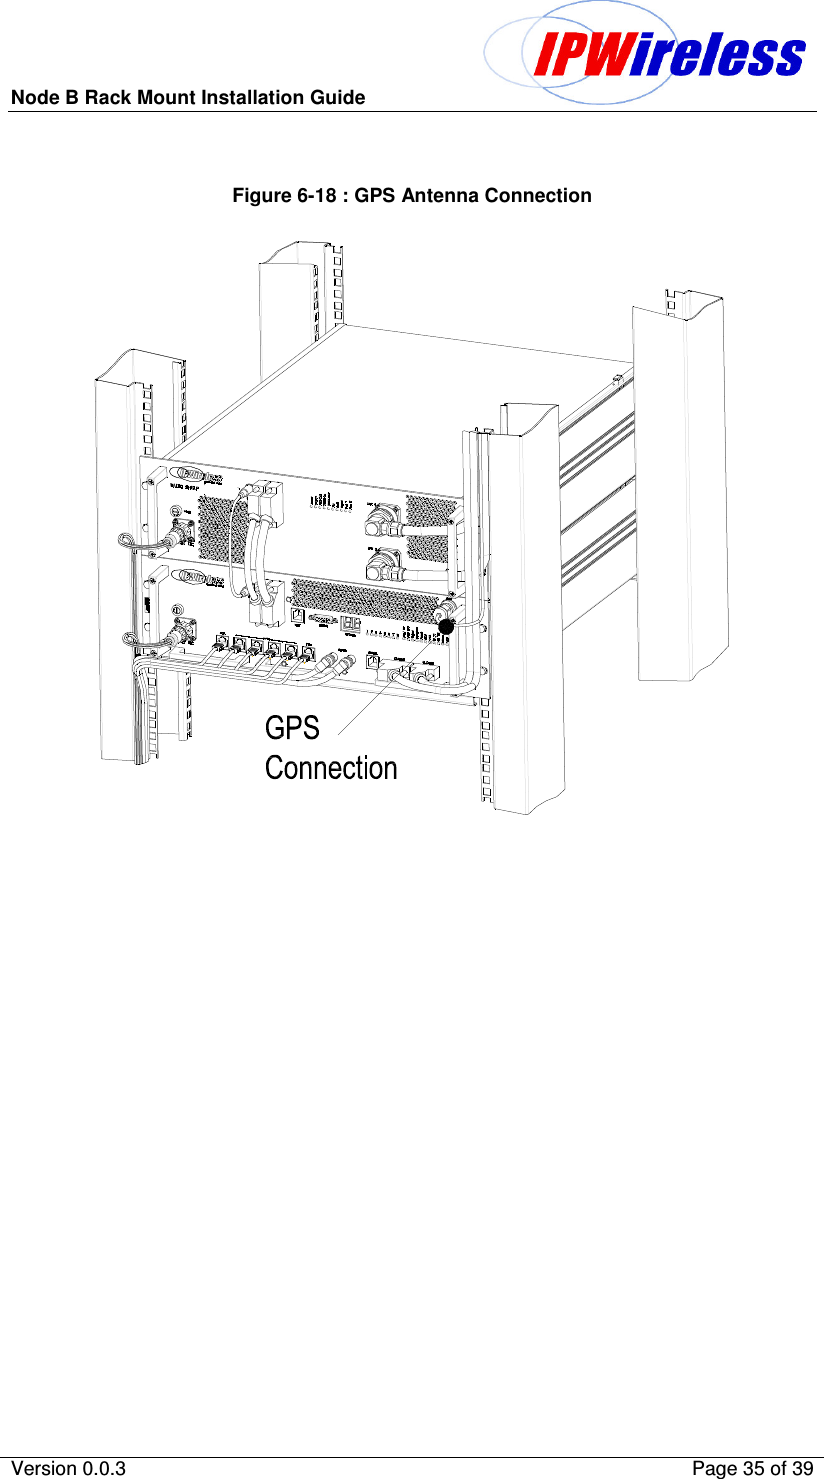 Node B Rack Mount Installation Guide                          Version 0.0.3    Page 35 of 39    Figure 6-18 : GPS Antenna Connection   